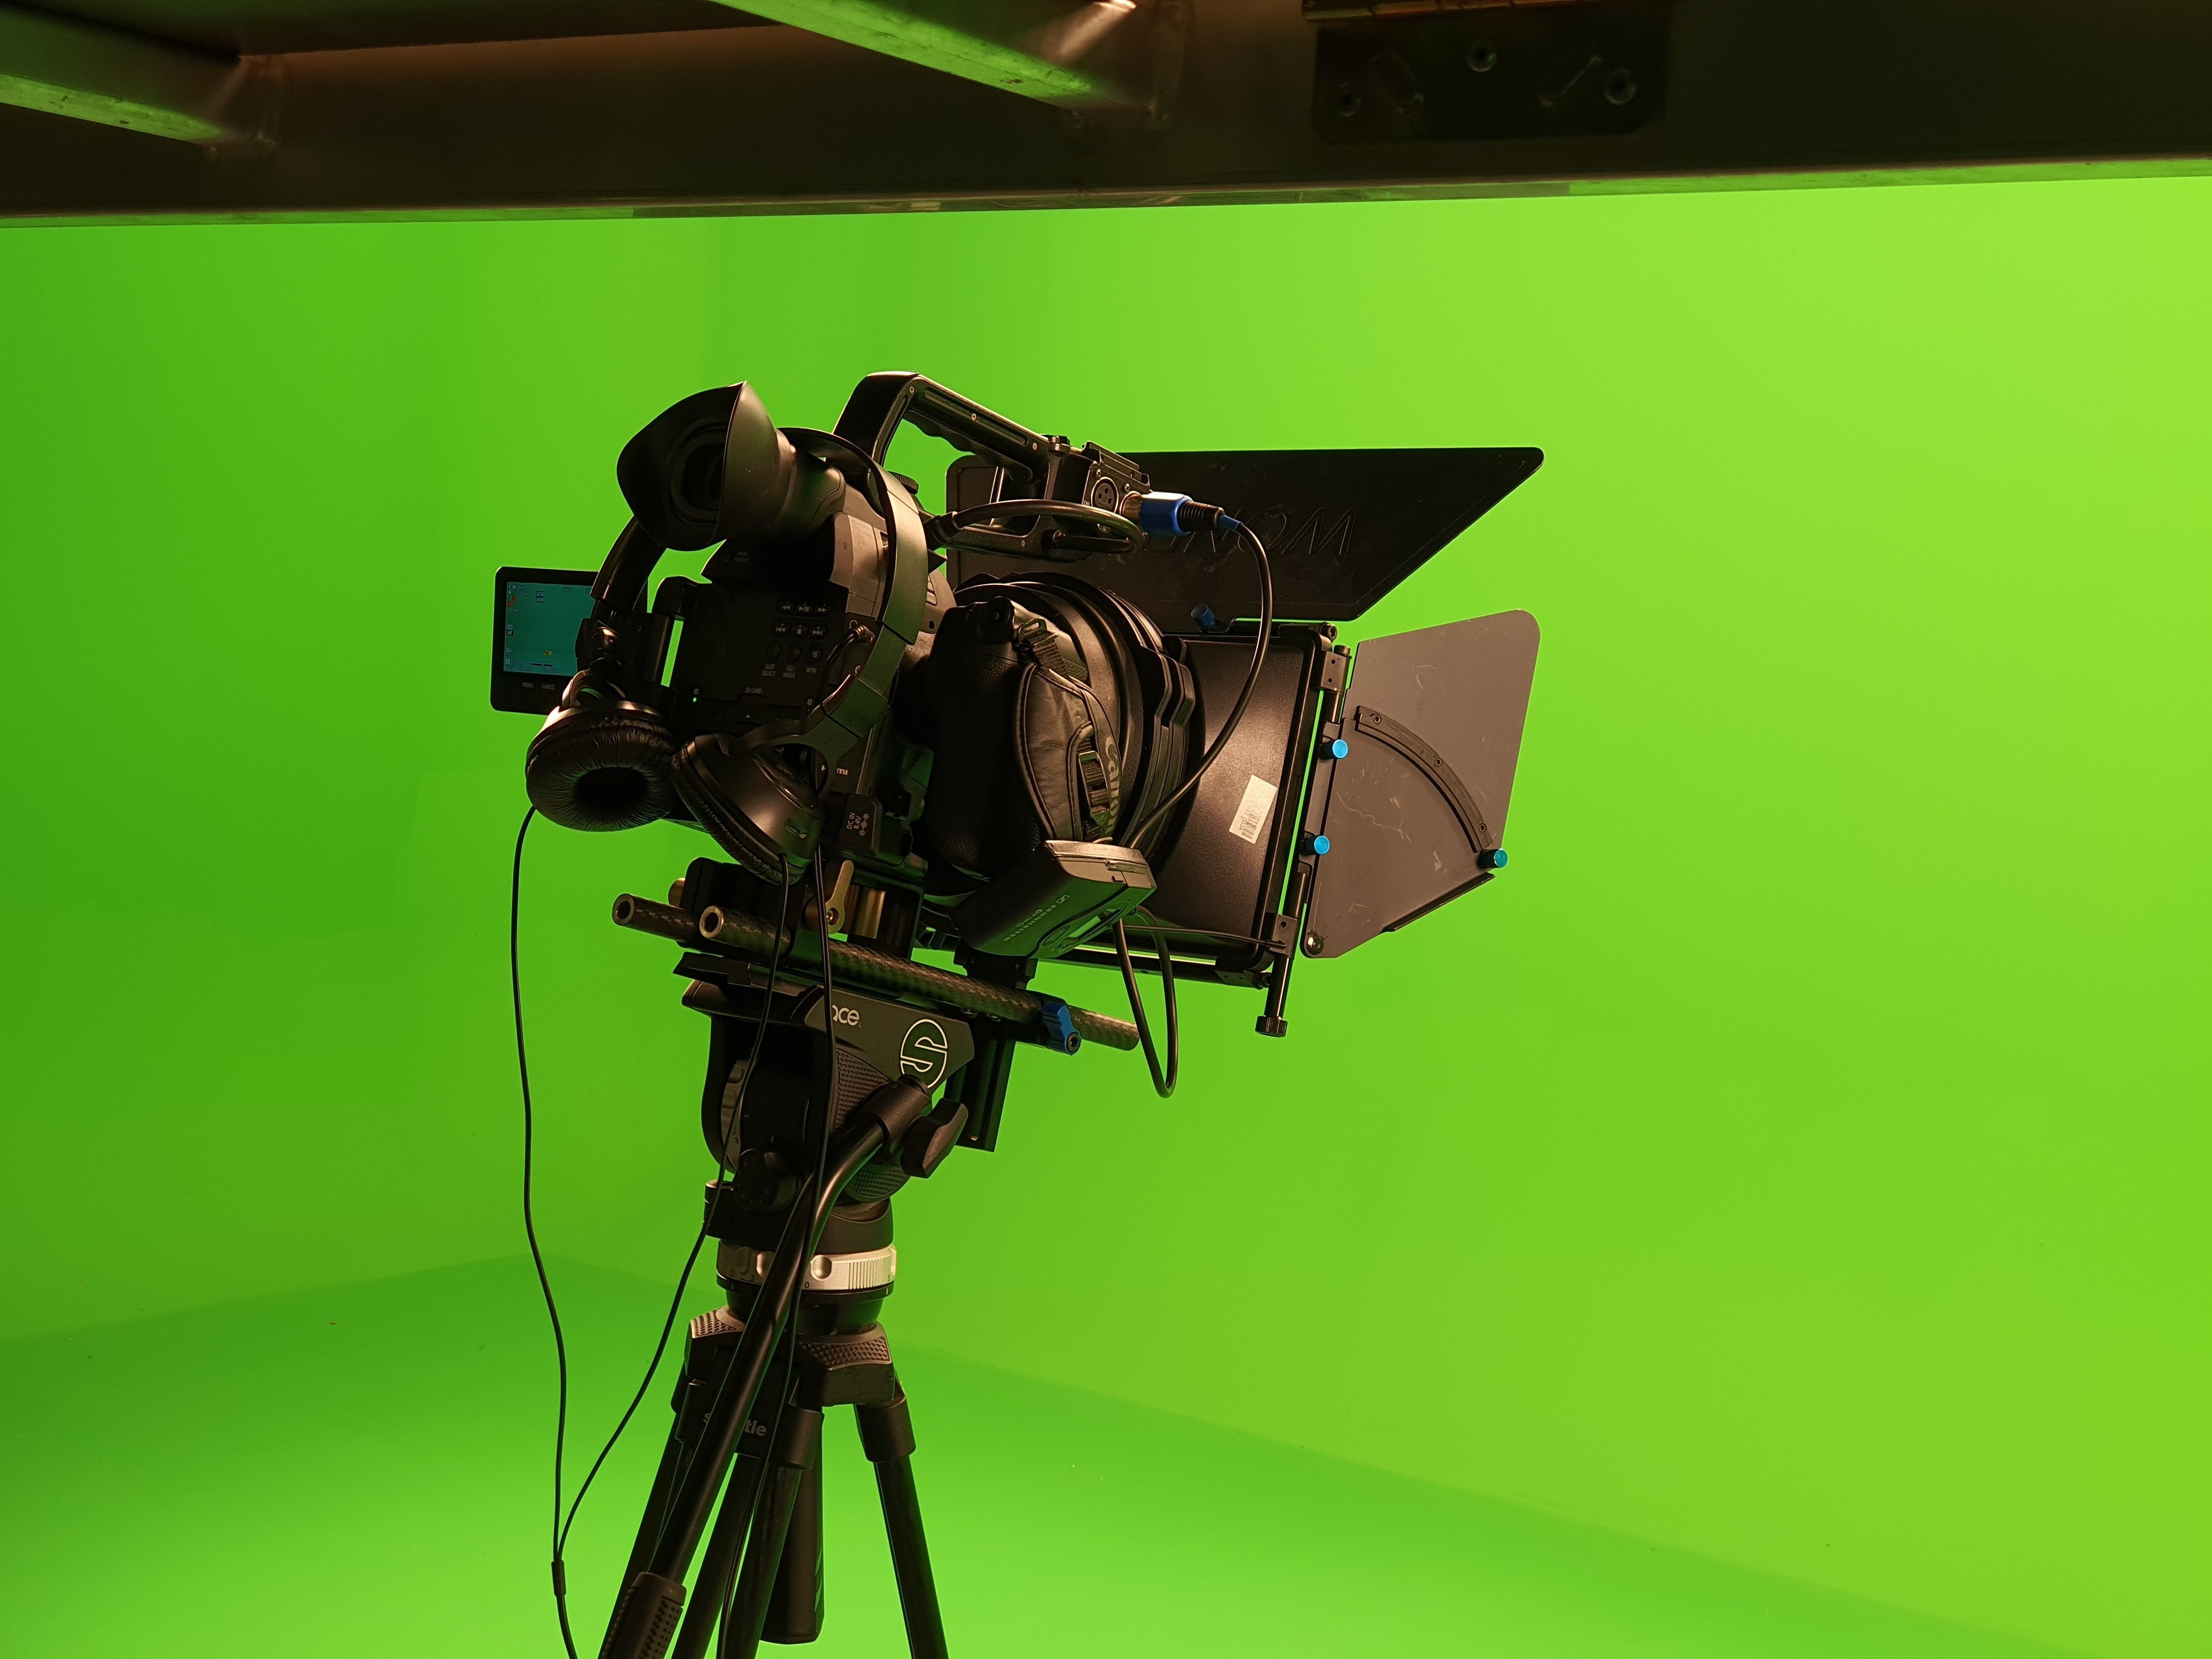 How Does A Green Screen Work?